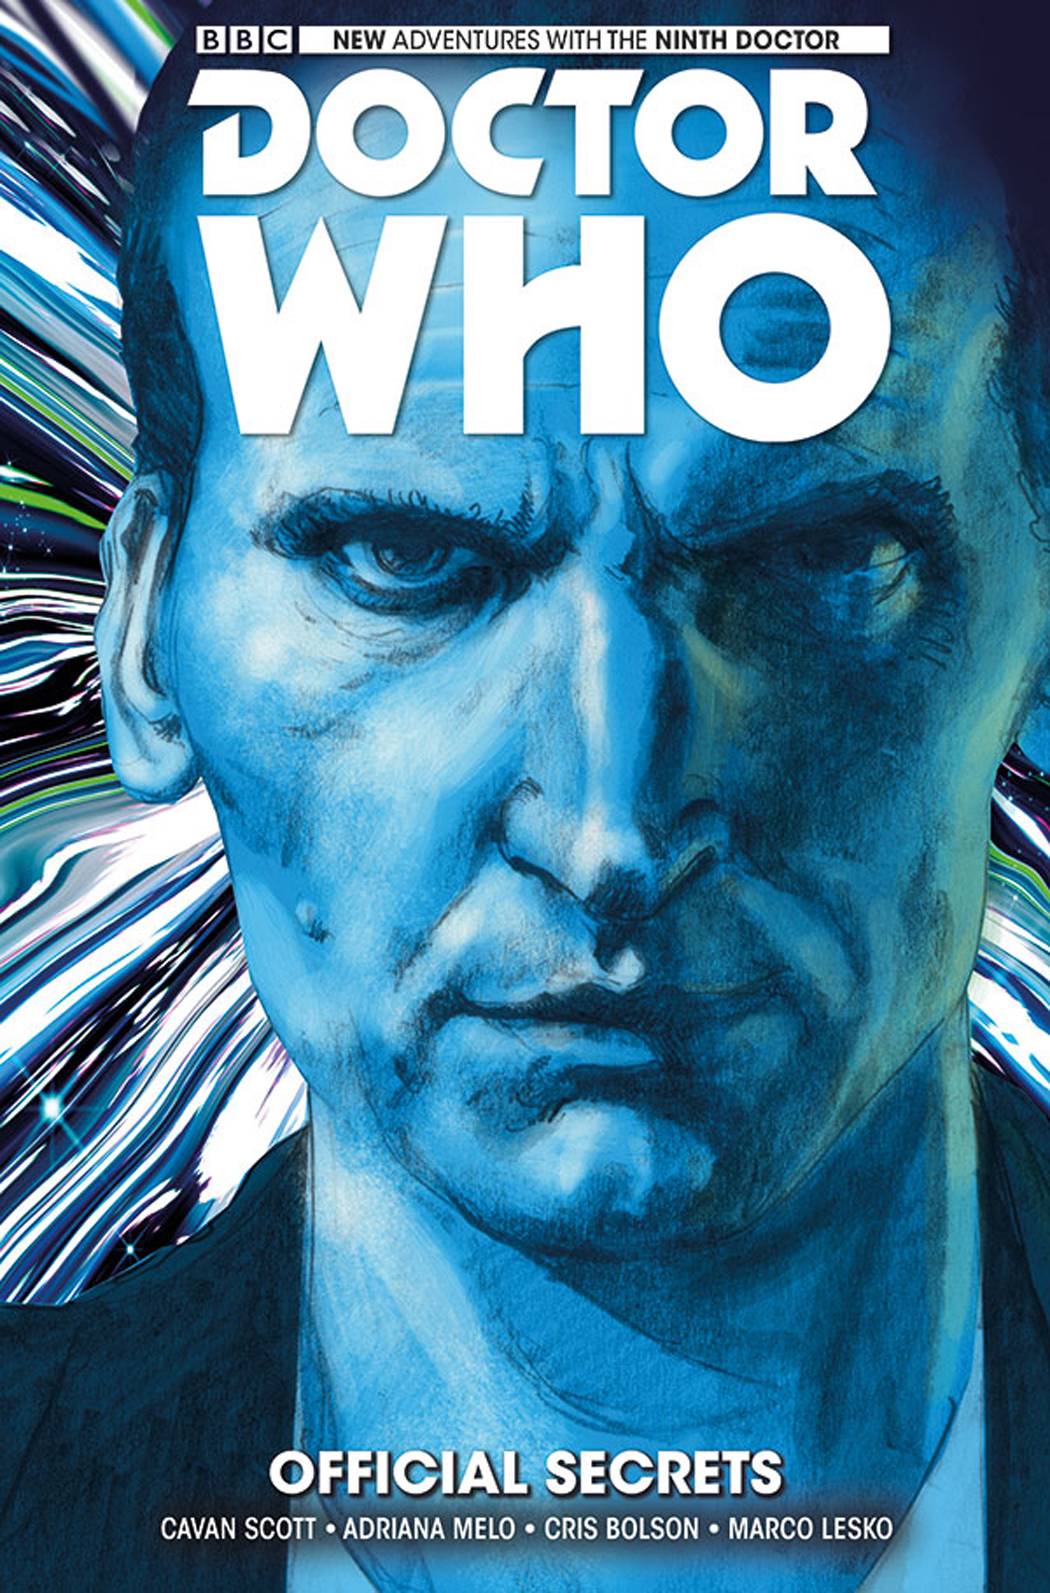 Doctor Who 9th Doctor Hardcover Graphic Novel Volume 3 Official Secrets